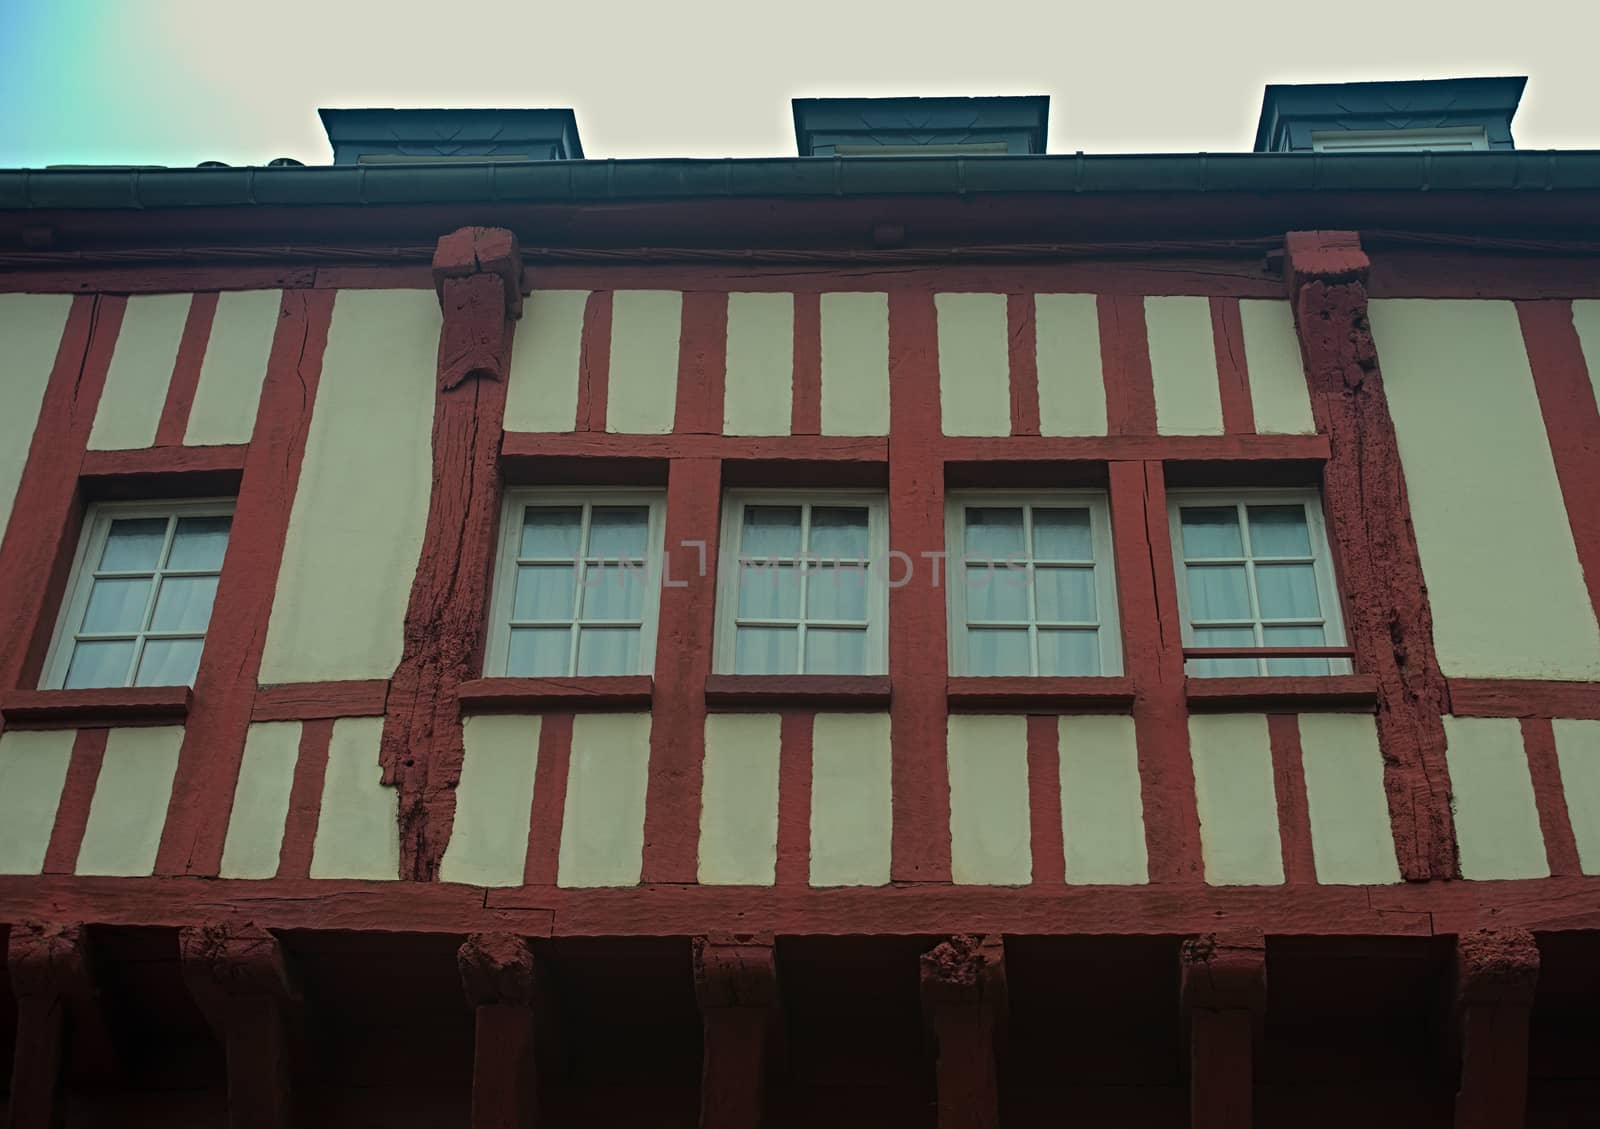 Windows and facade on medieval house in Dinon, France